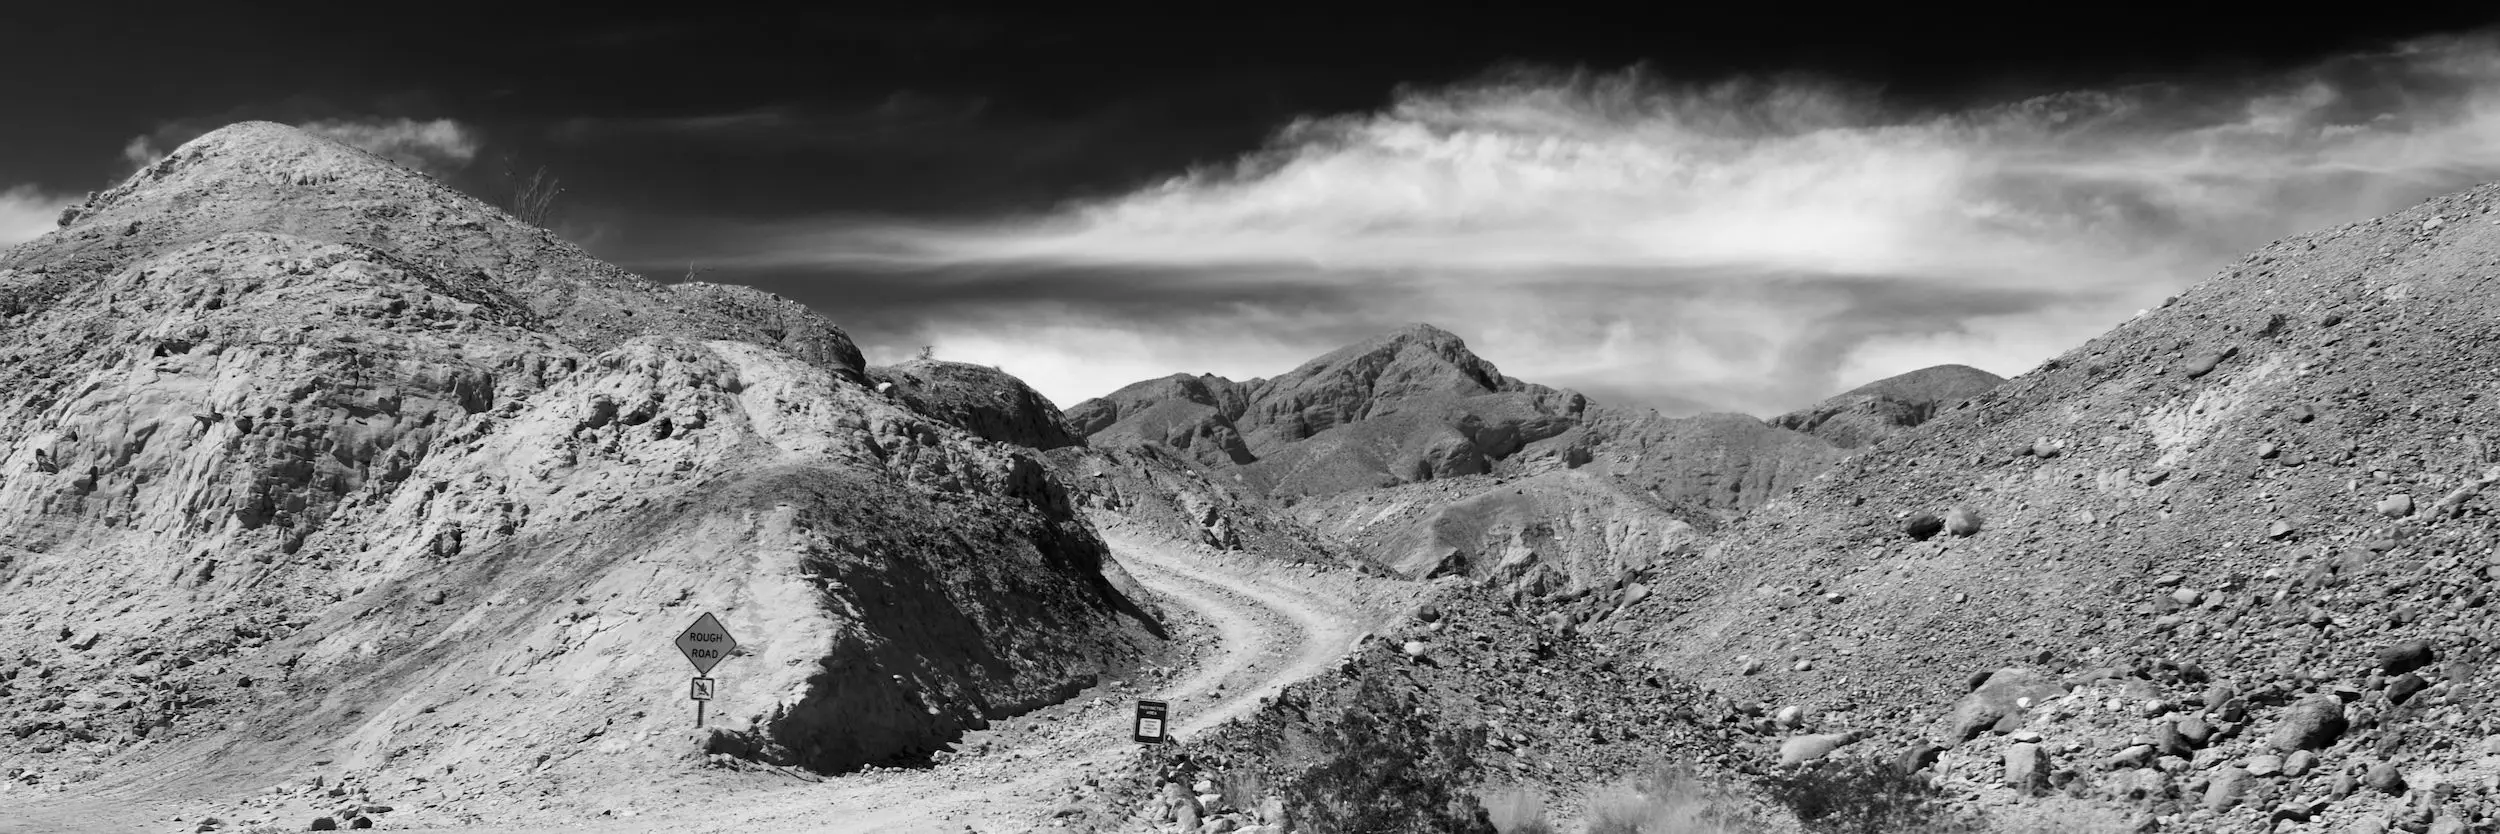 Black and white wide shot of a curving road in between a rocky landscape with dramatic clouds in the sky.